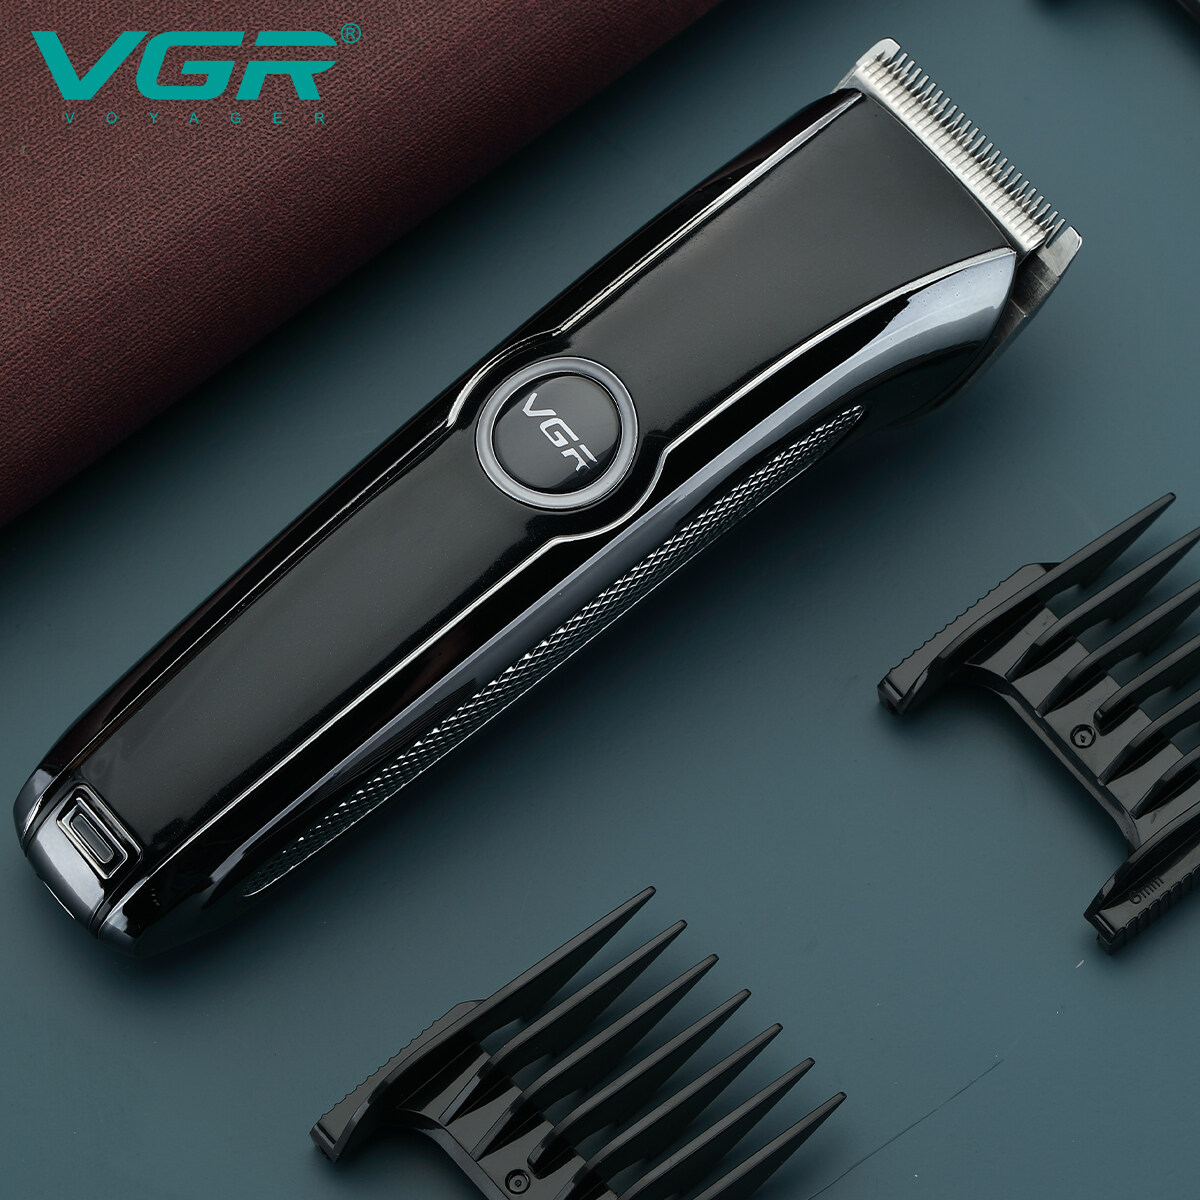 Rechargeable Hair Trimmer Factories, Rechargeable Hair Cut Trimmer Wholesaler, Wholesale Professional Hair Trimmer